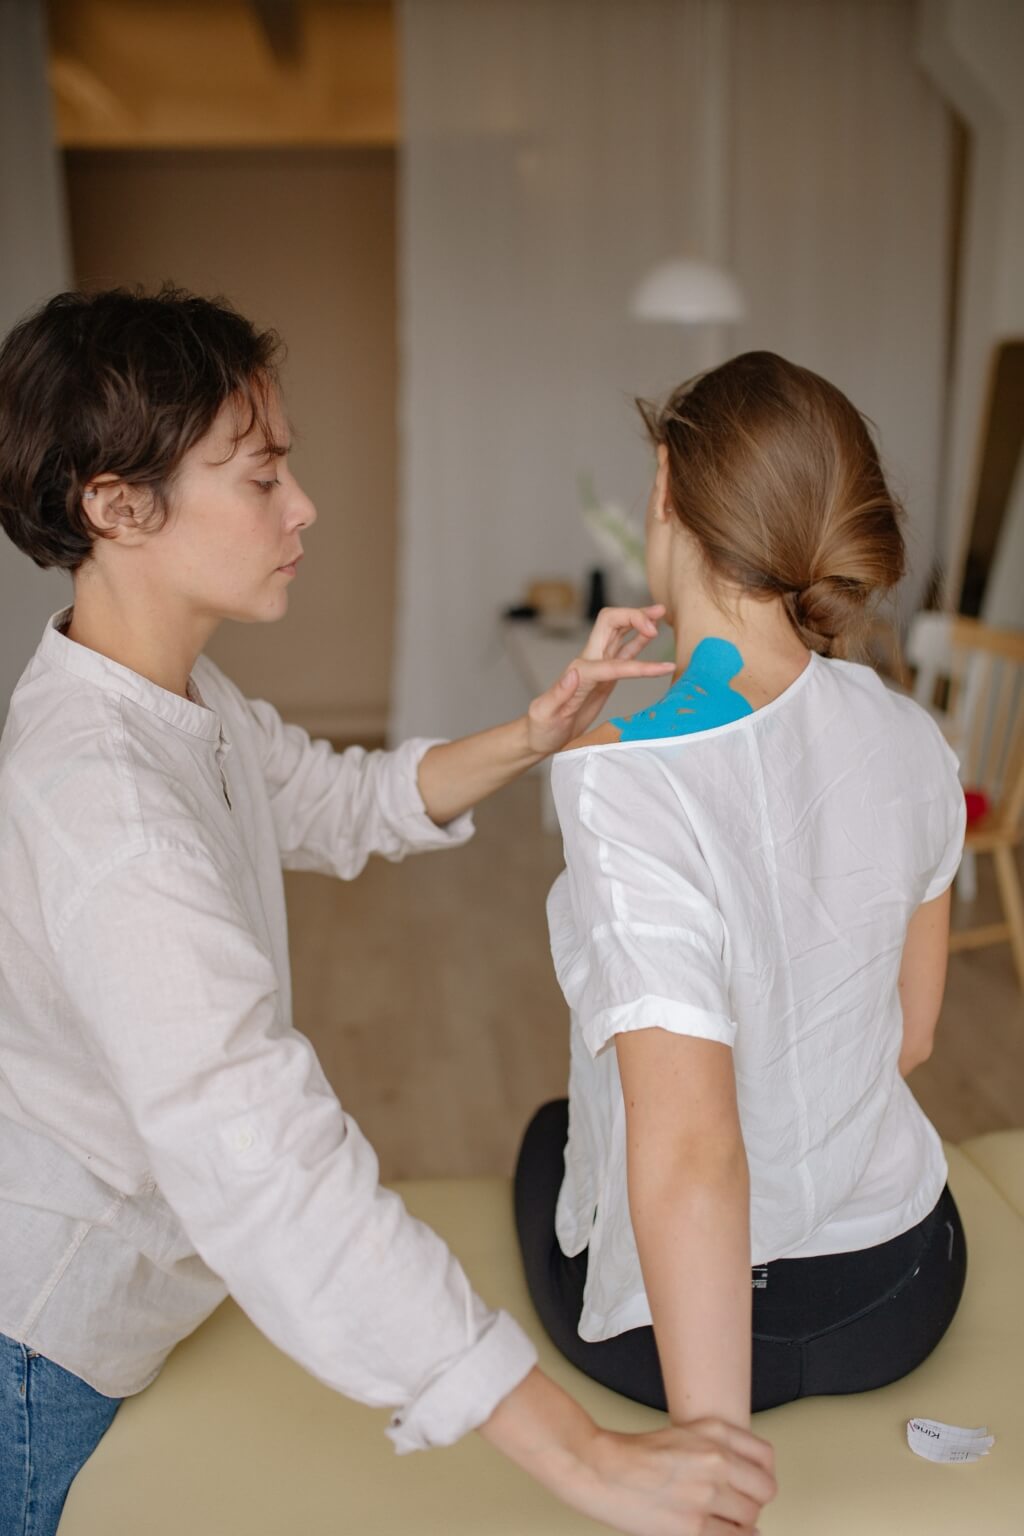 A woman laying a blue strap on another woman